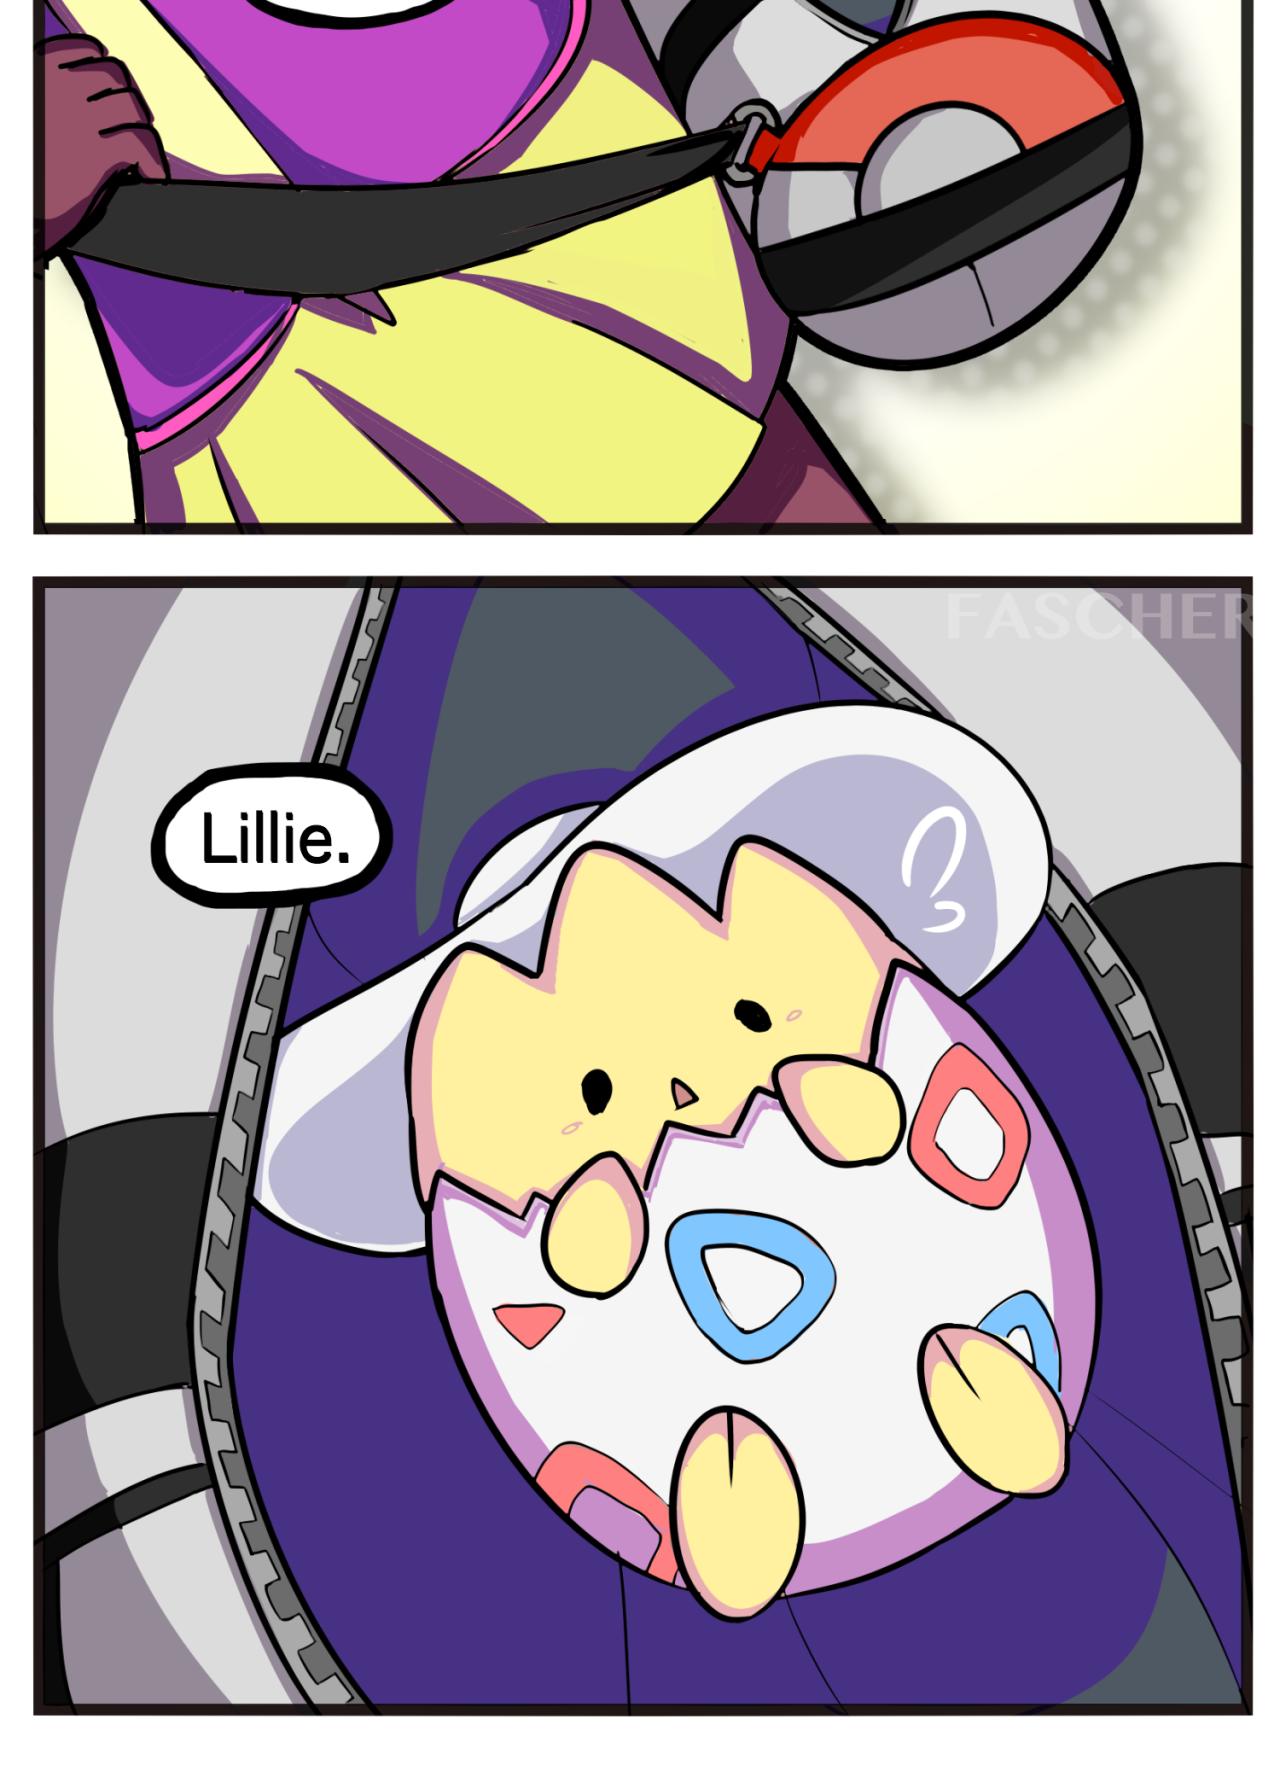 rasec-wizzlbang: hazardnuzlocke: au where nebby is the trainer and lillie is the